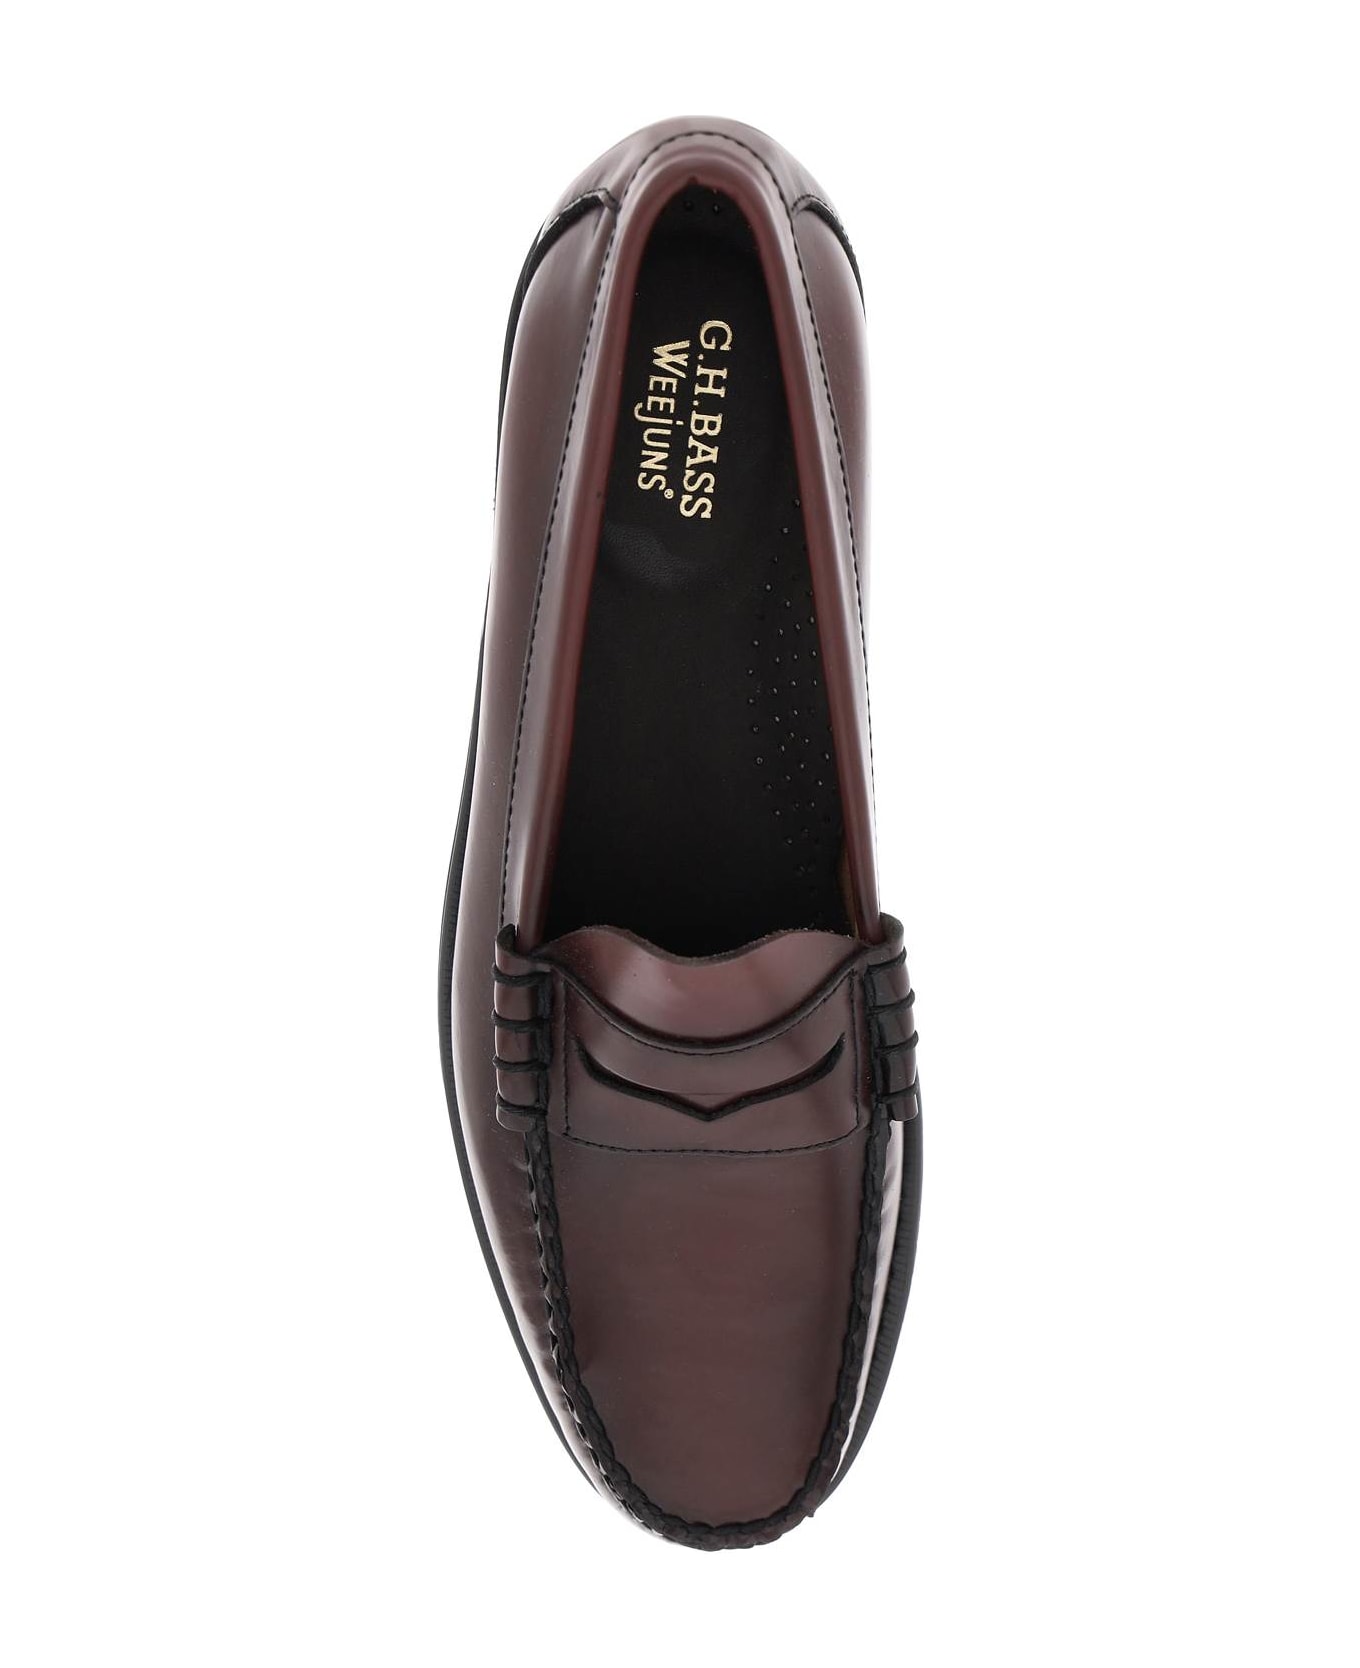 G.H.Bass & Co. 'weejuns Larson' Penny Loafers - WINE (Purple)